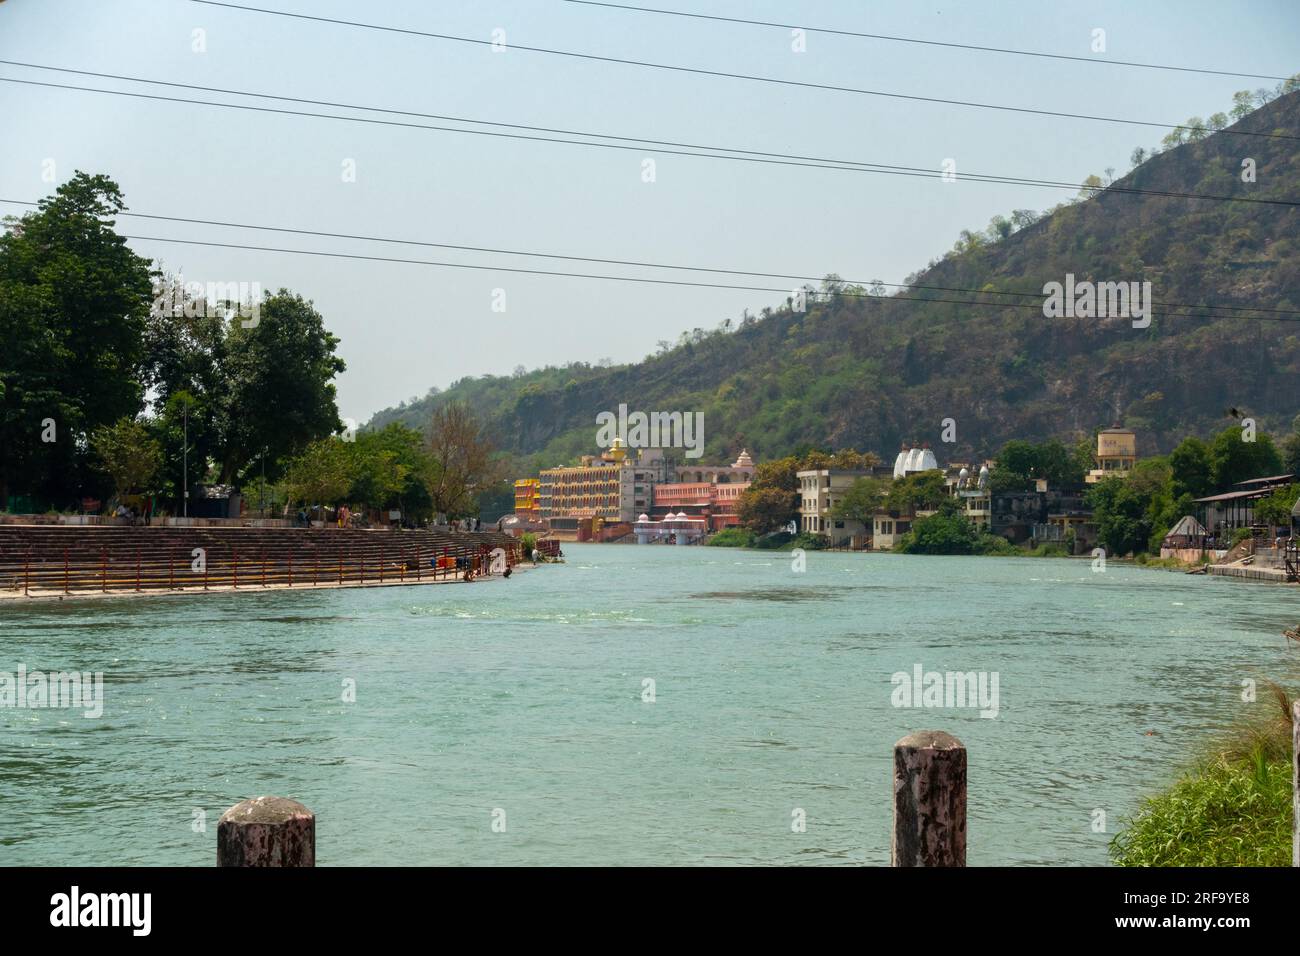 June 28th 2022, Uttarakhand India. Holy city Haridwar: A stunning capture of River Ganges flowing amidst majestic mountains and sacred bathing ghats. Stock Photo